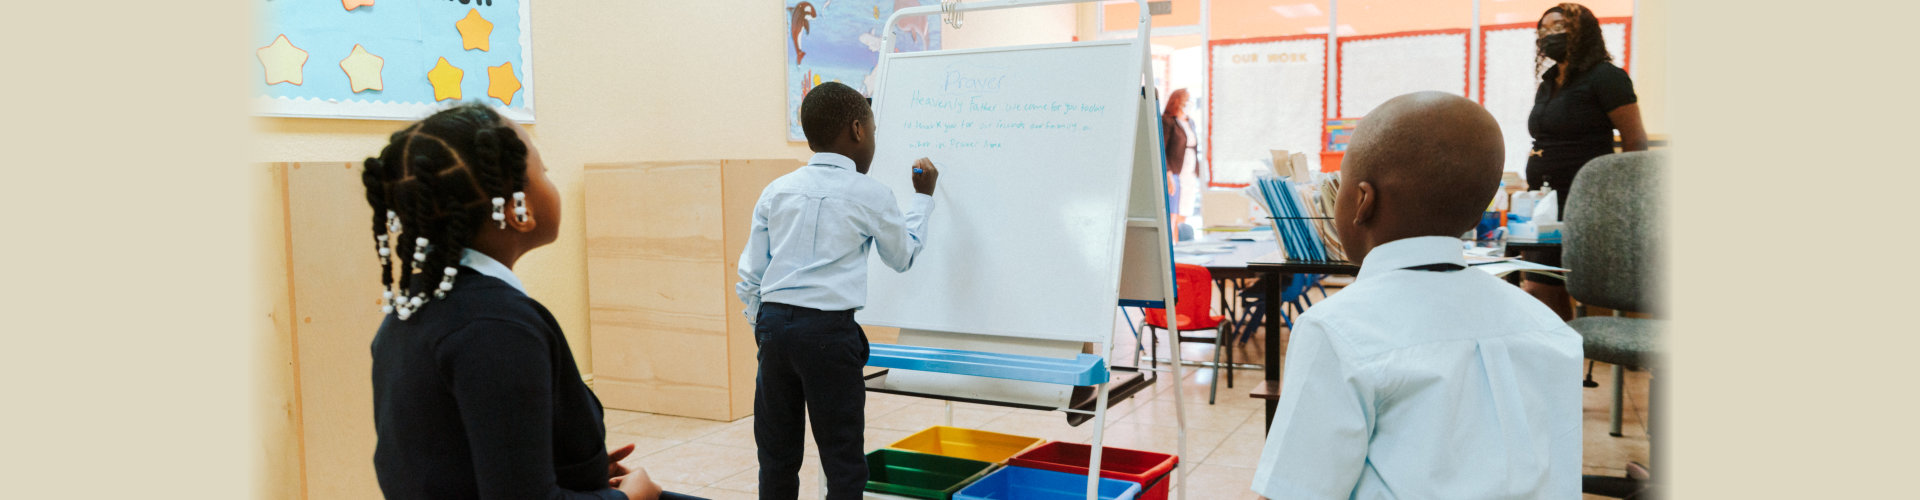 student writing in a whiteboard with teacher and other students